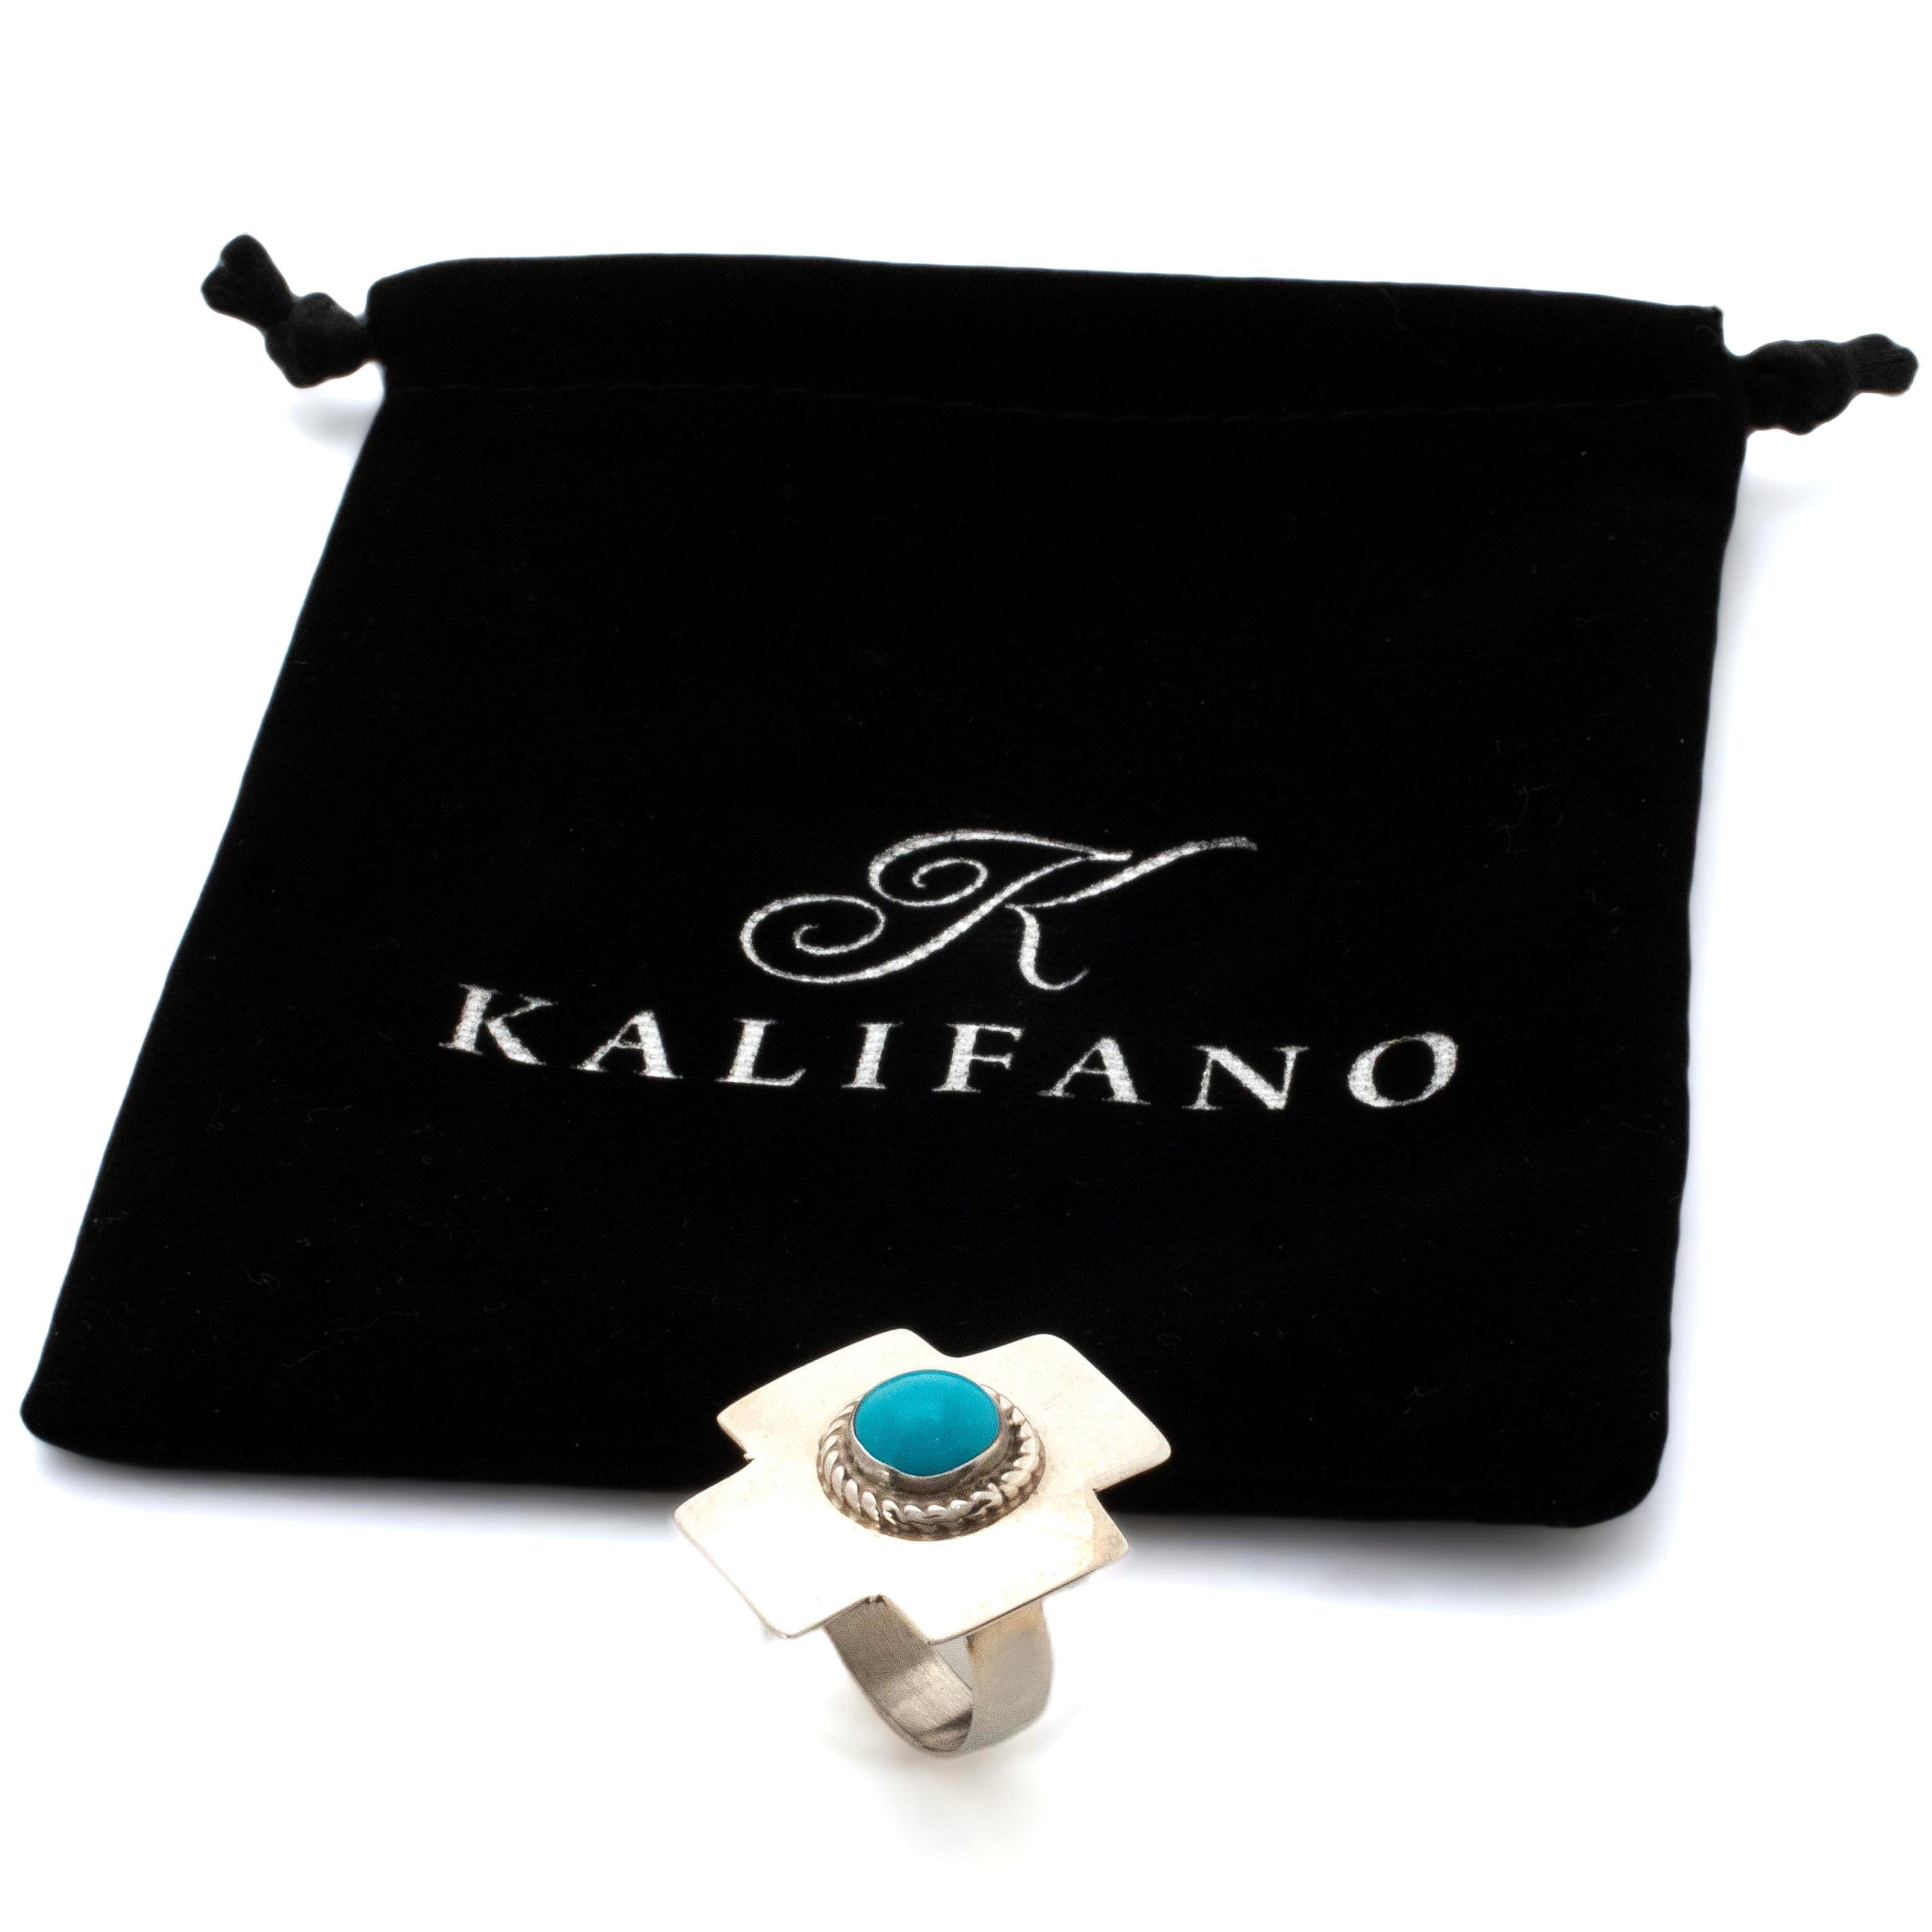 Kalifano Native American Jewelry Sleeping Beauty Turquoise Circle USA Native American Made 925 Sterling Silver Ring